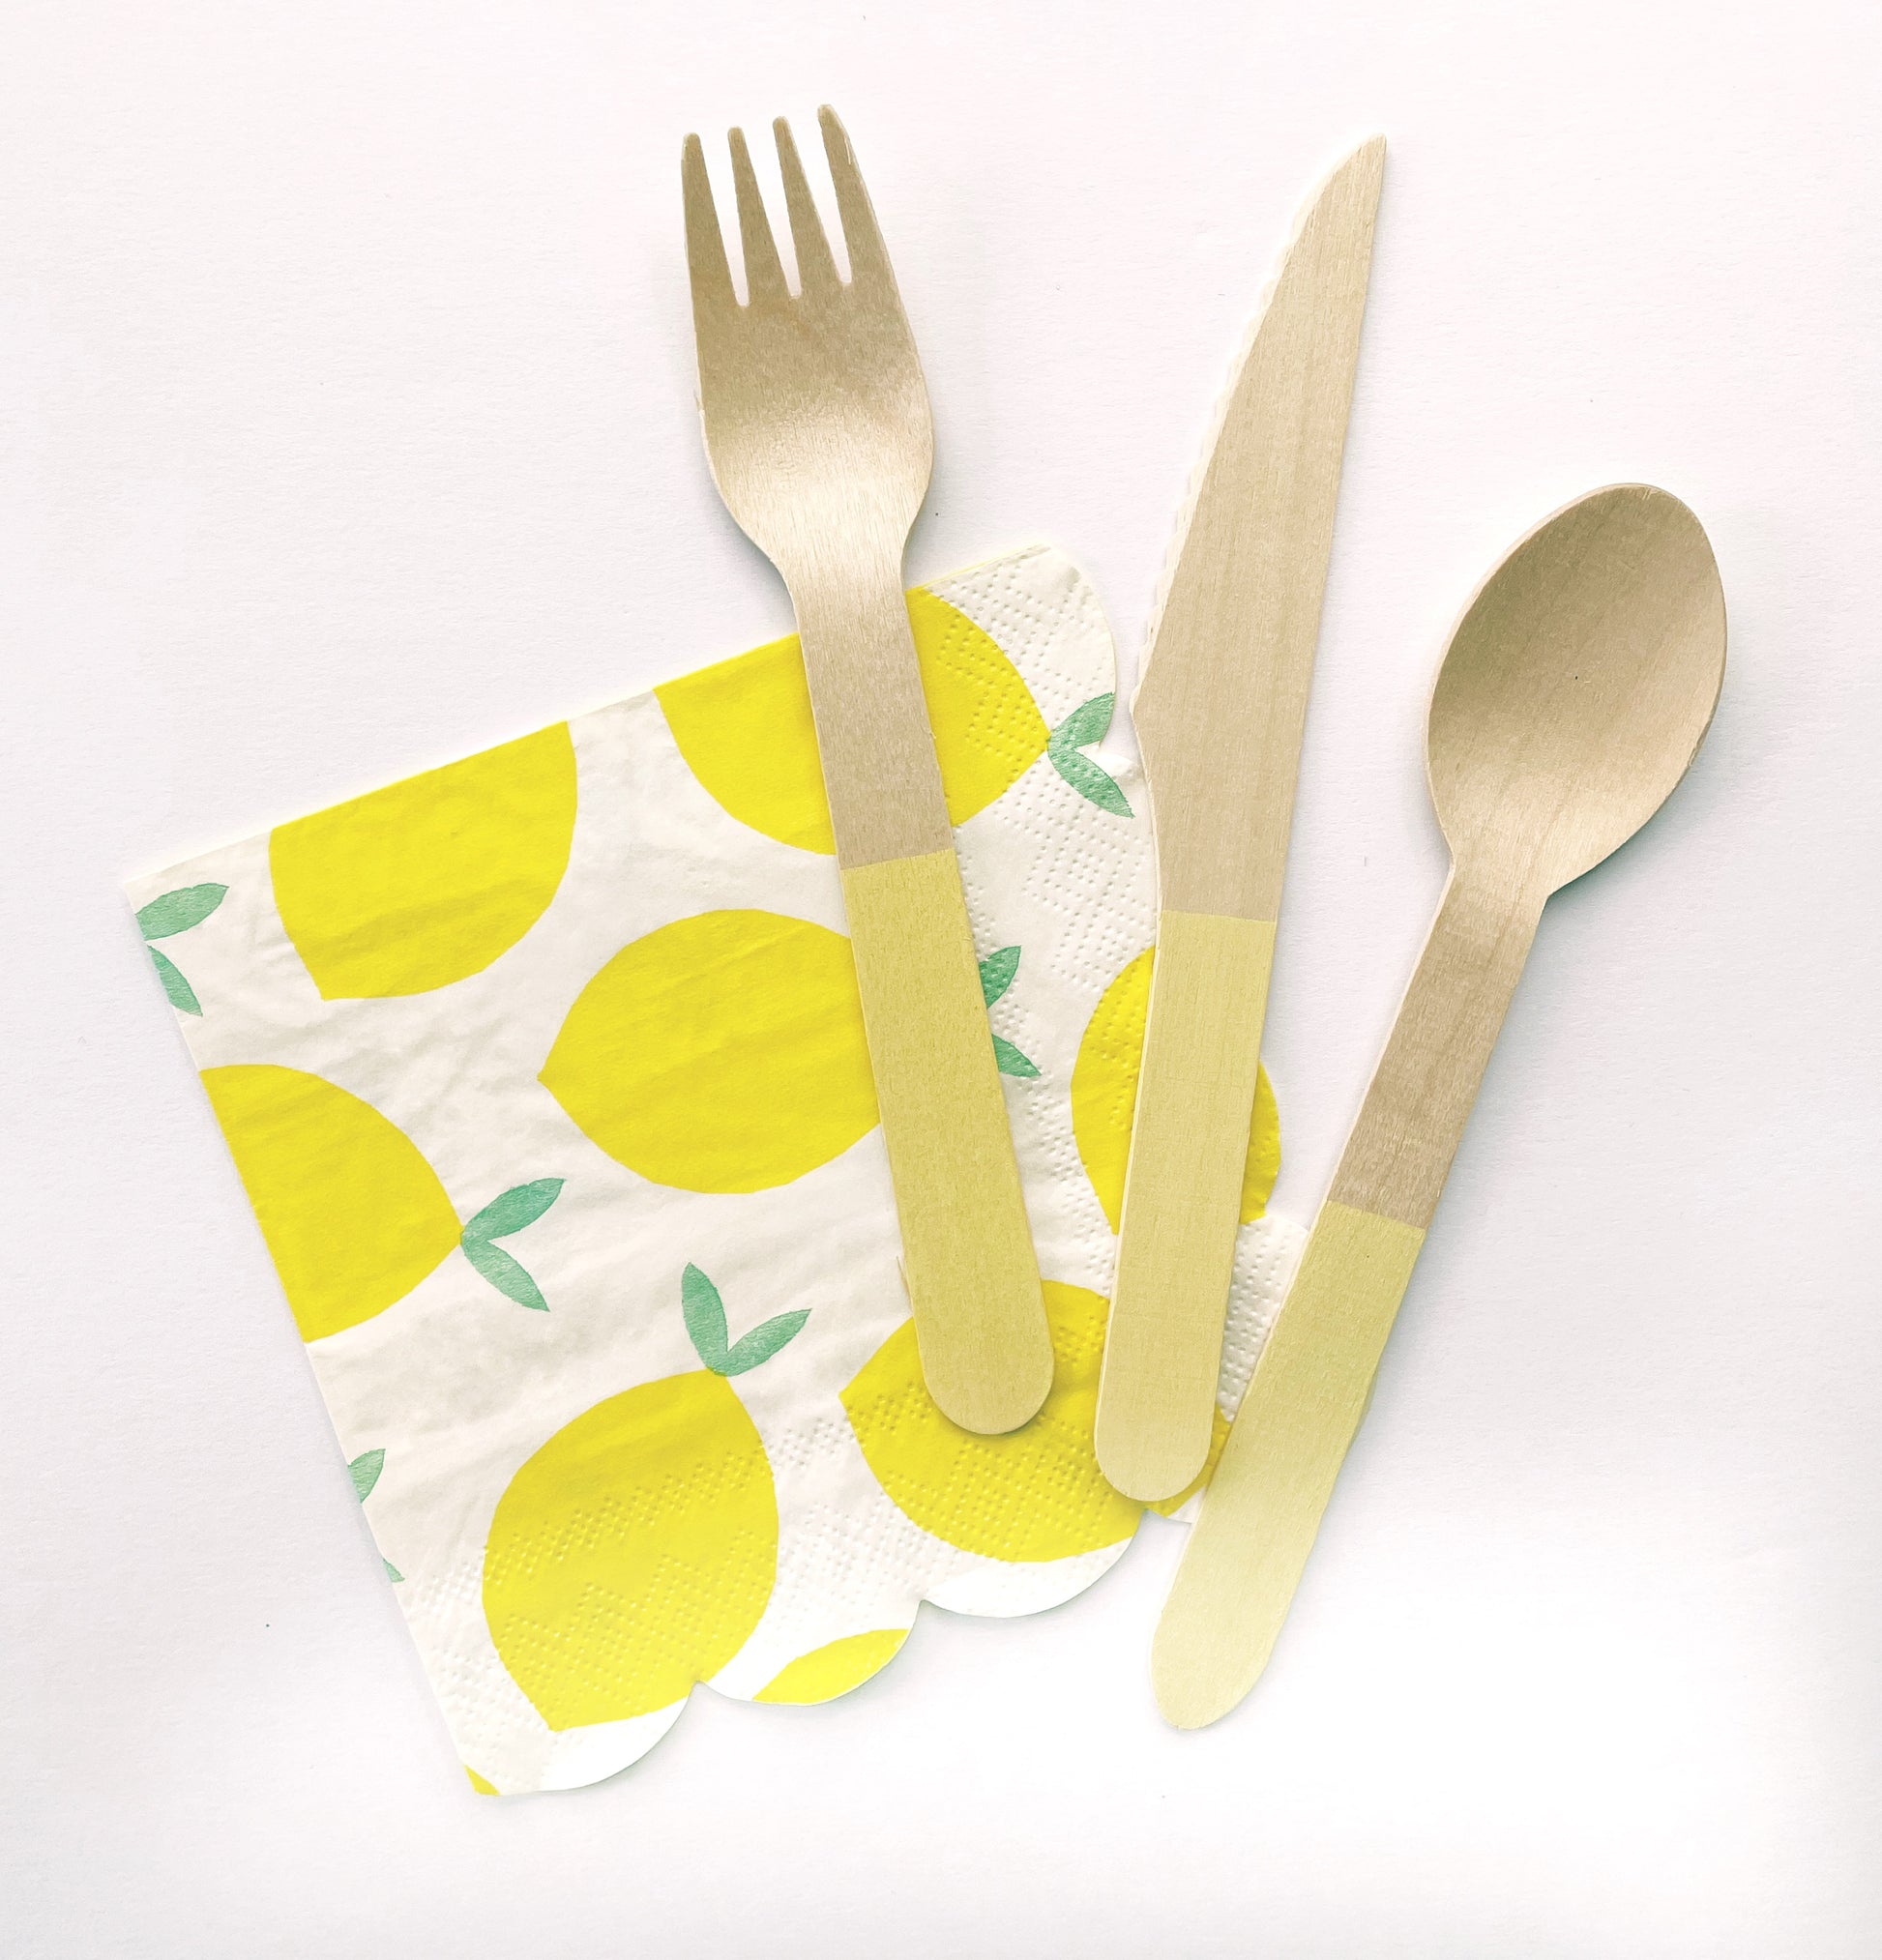 The Lemon Party Kit's napkins and utensils. The paper party napkins have a lemon pattern including yellow, green and white colours. The napkins have scalloped edges. The Lemon party kit's yellow dipped wooden utensils, including a fork, spoon and knife.